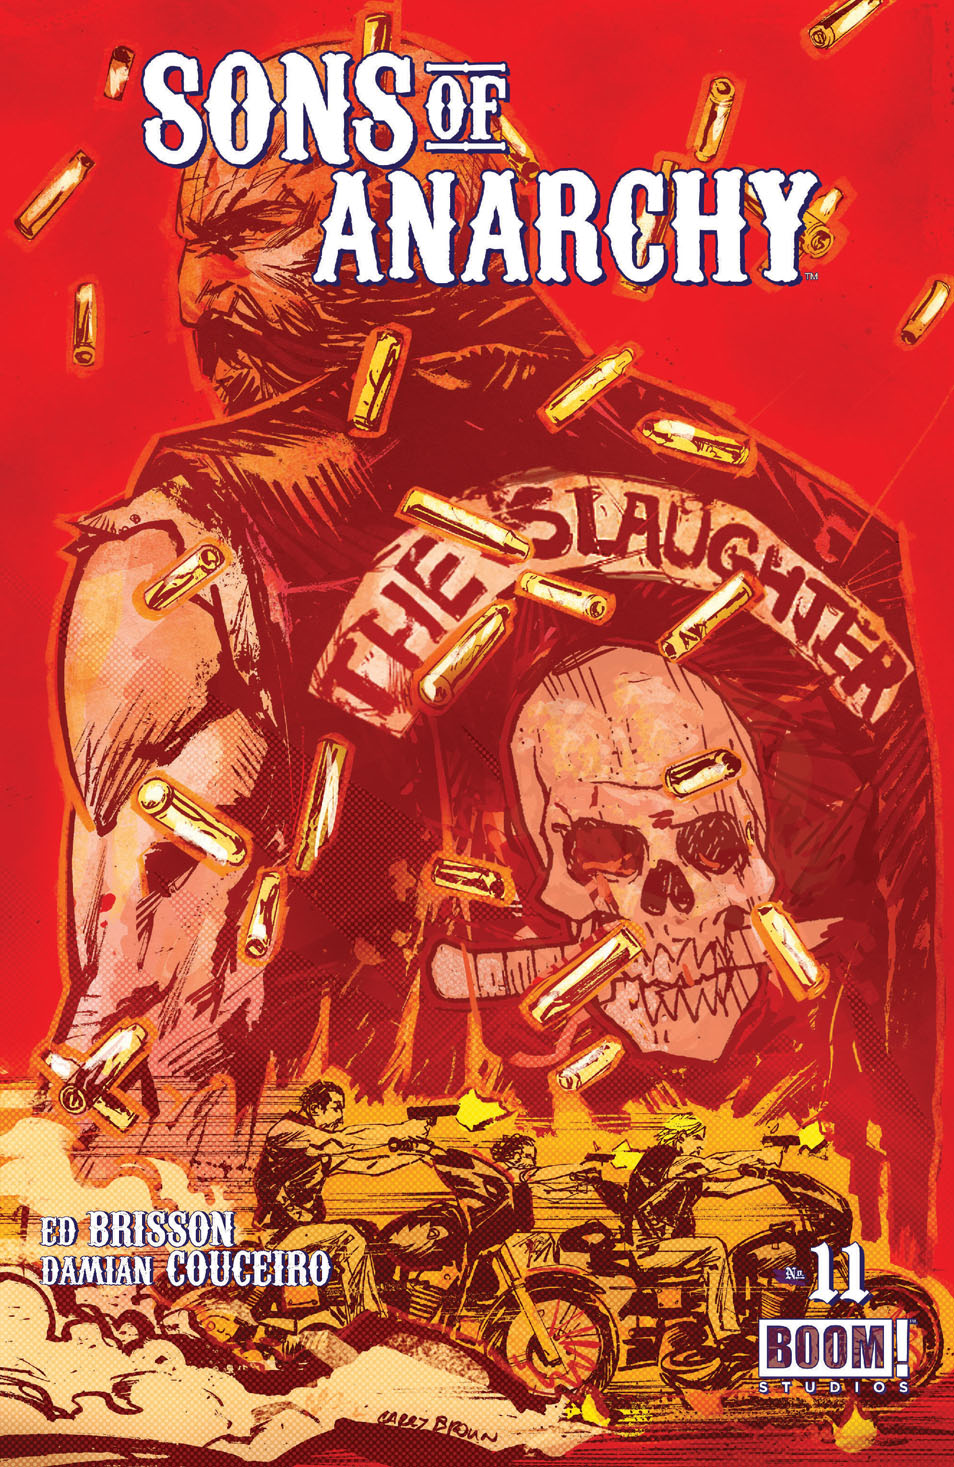 This image is the cover for the book Sons of Anarchy #11, Sons of Anarchy